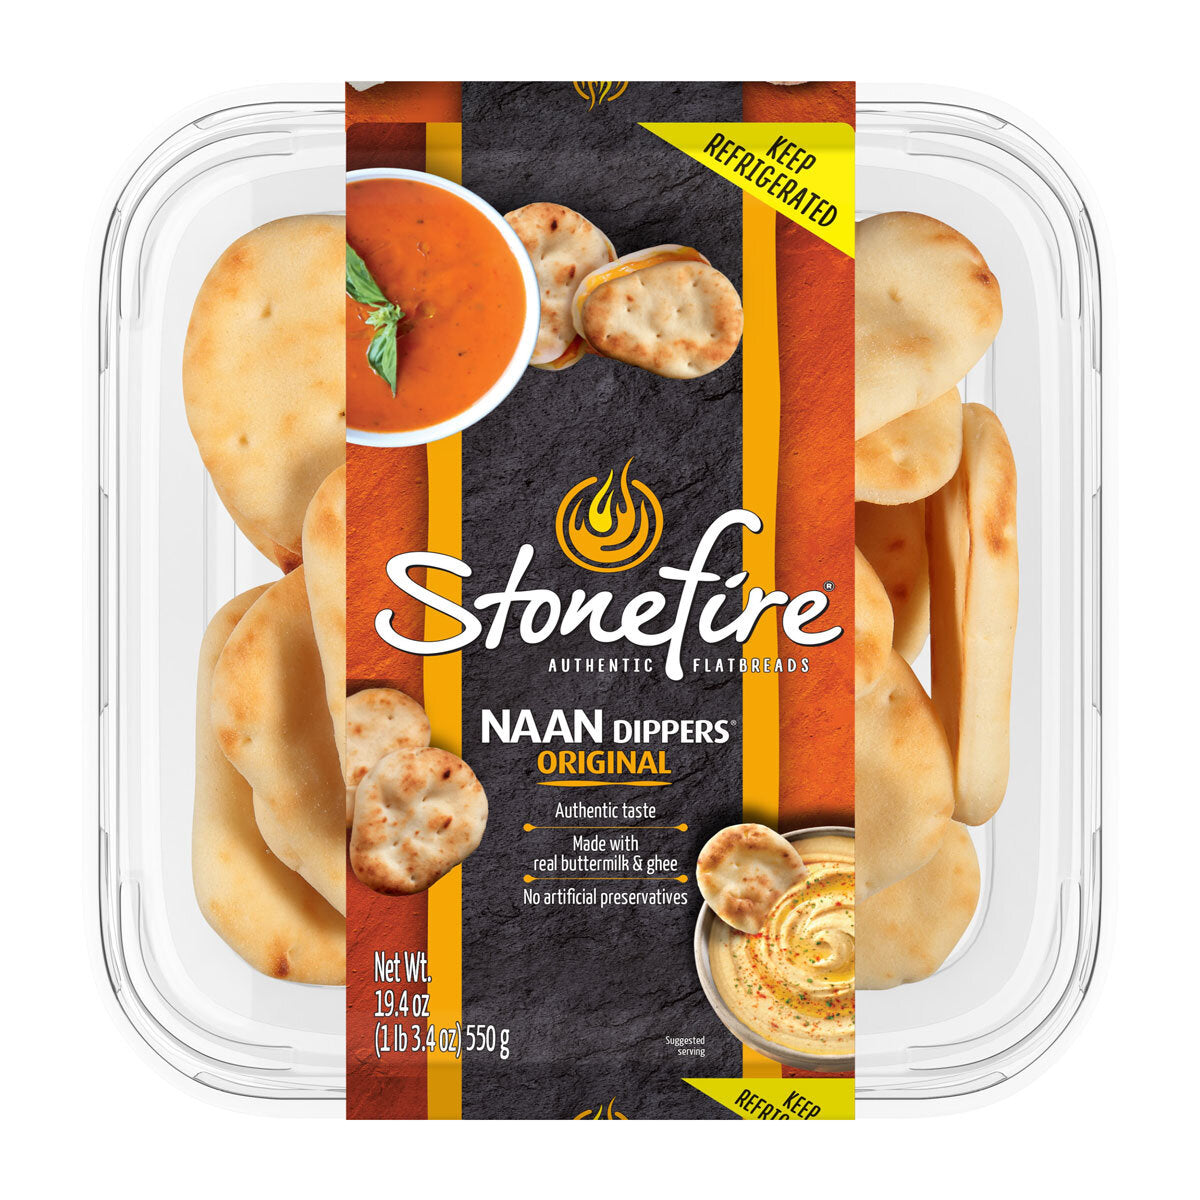 Costco Stonefire Naan Dippers 550g